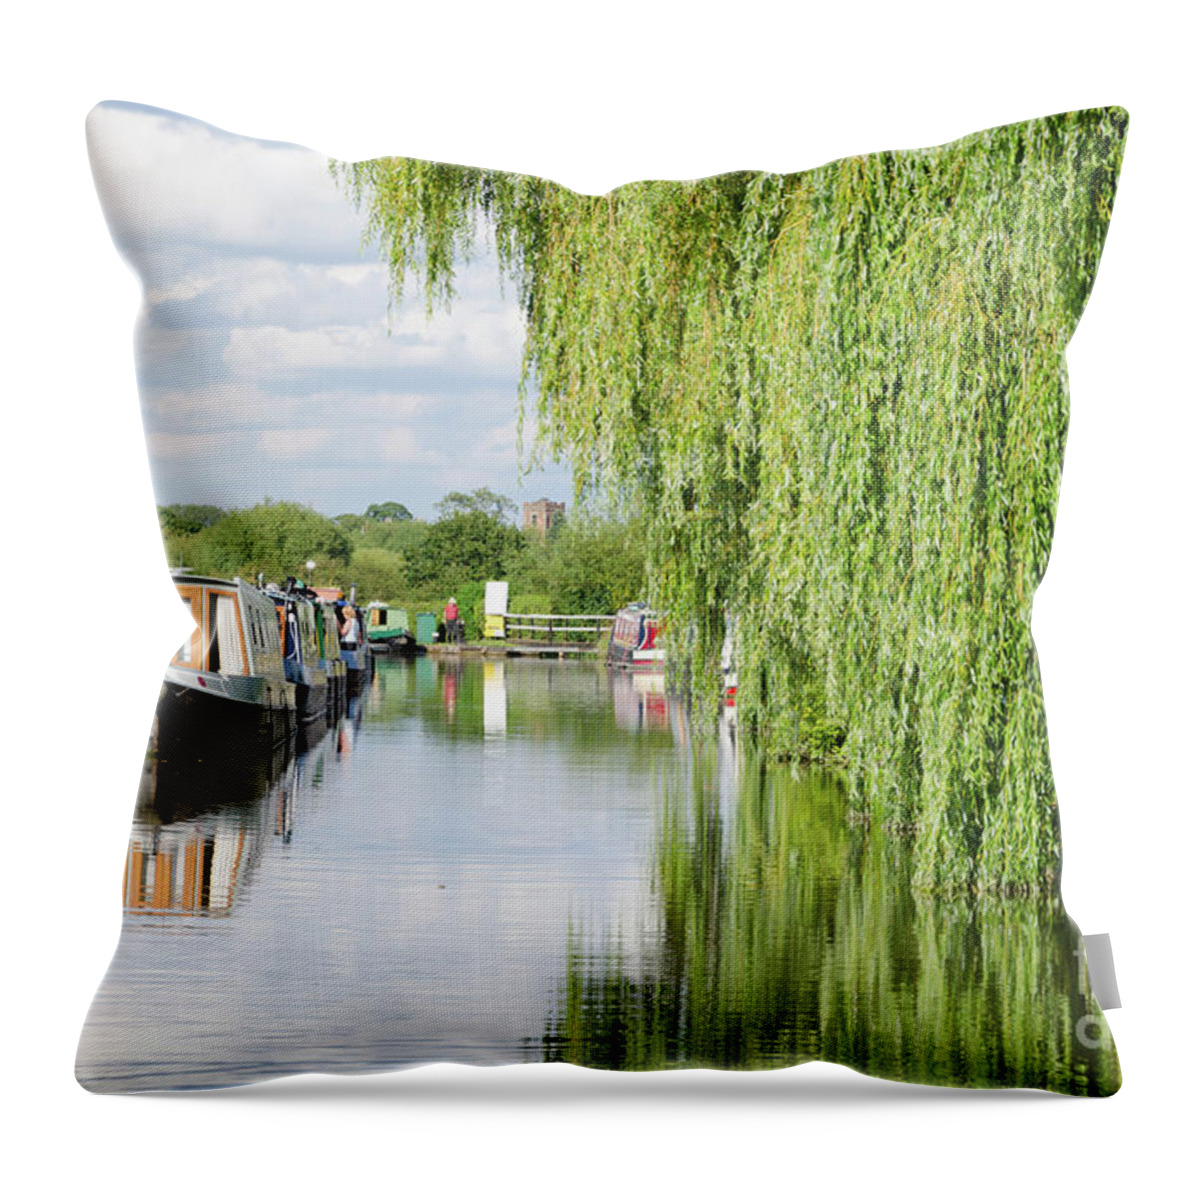 Alrewas Throw Pillow featuring the photograph Alrewas canal scene by Steev Stamford